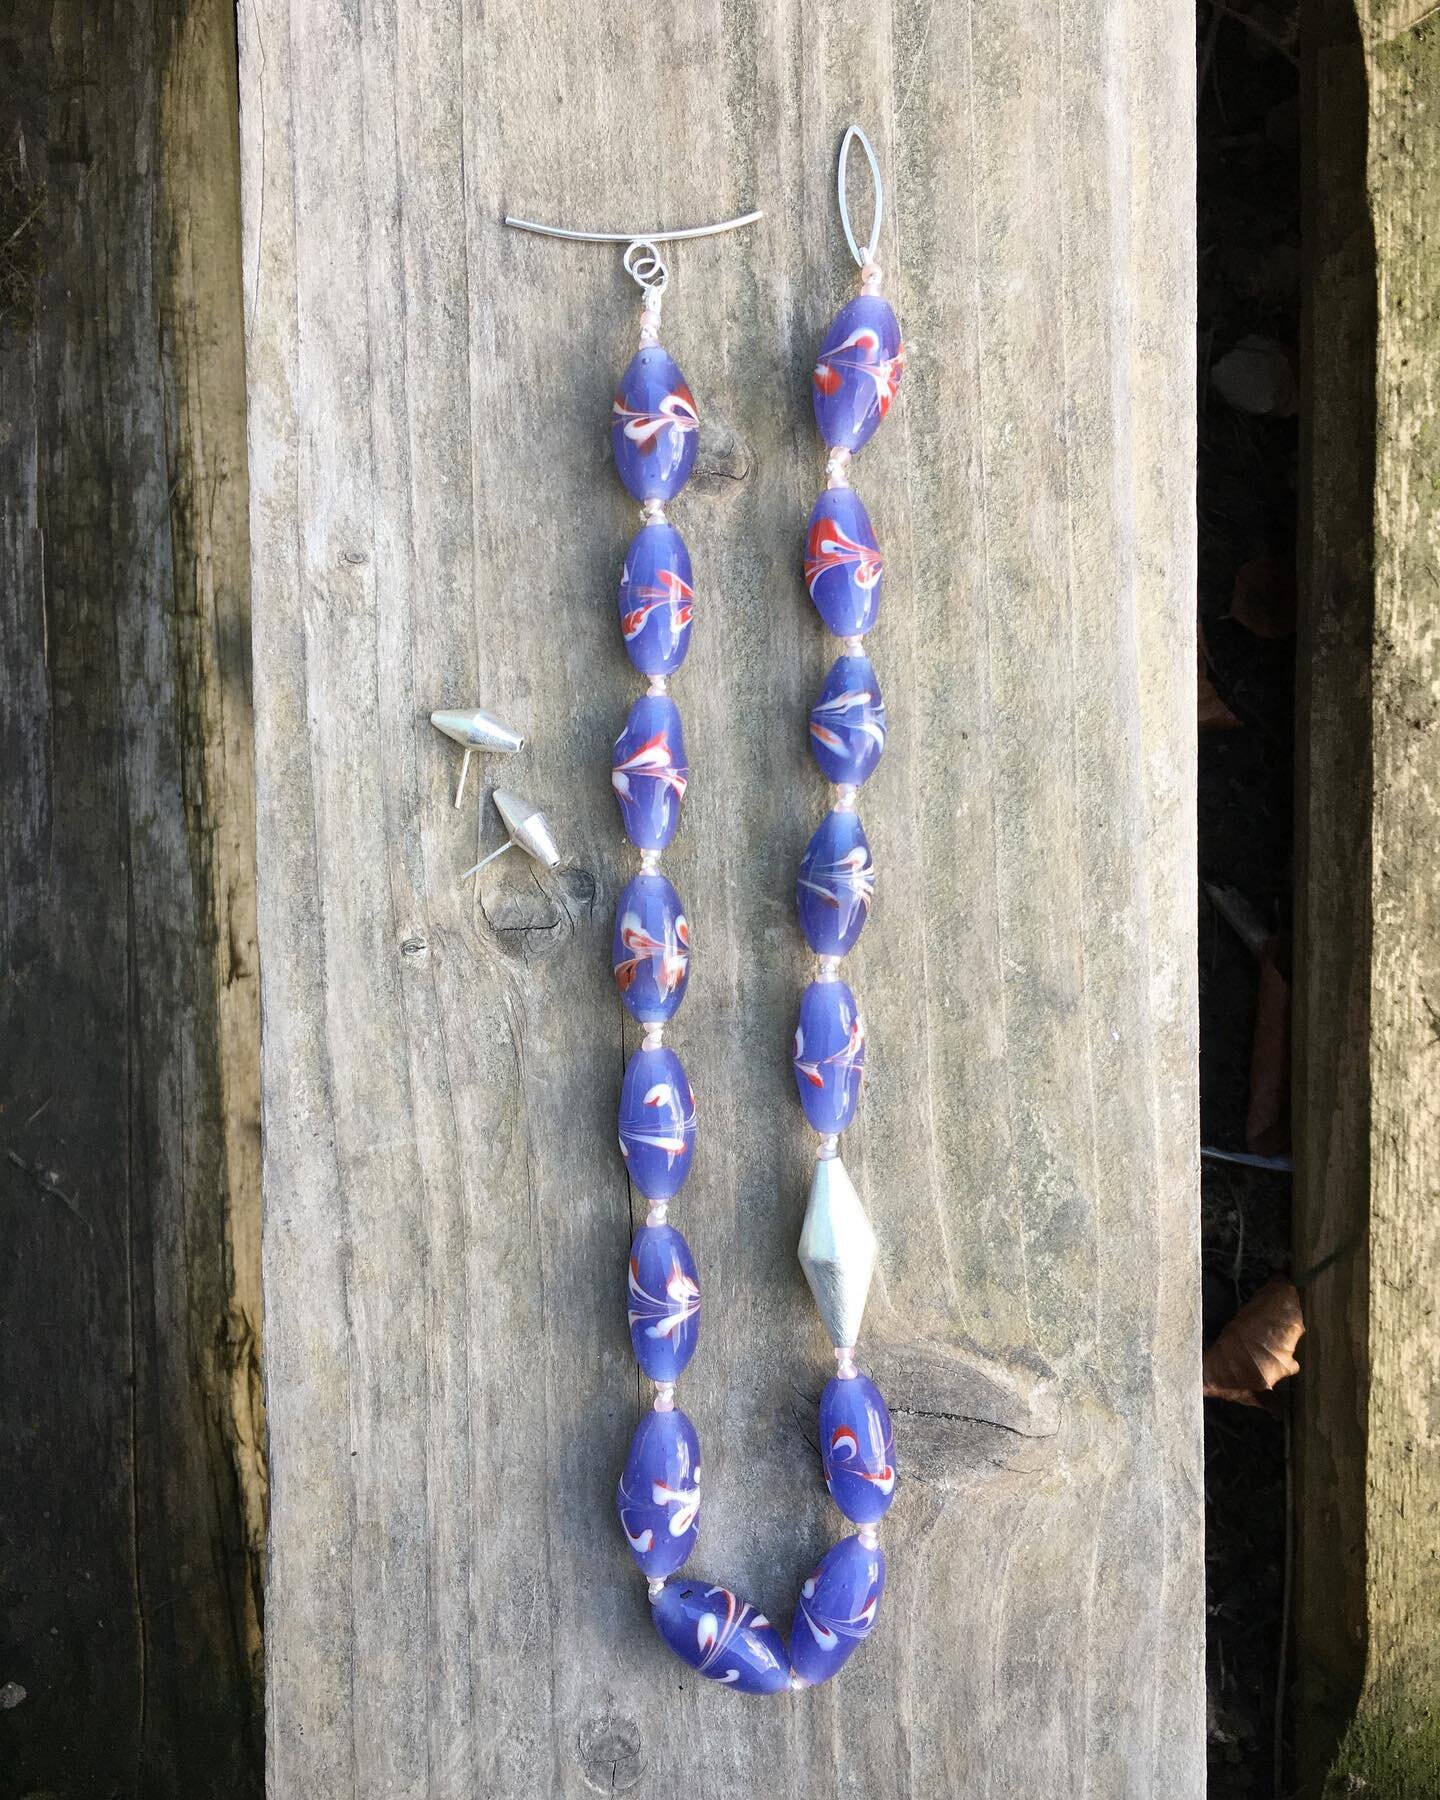 The latest in an occasional series&hellip;these glass beads were the clients own, I made a single silver one of a similar shape to string in to the piece. I like the brushed finish on the metal as a contrast to the smooth, shiny beads. The earrings w